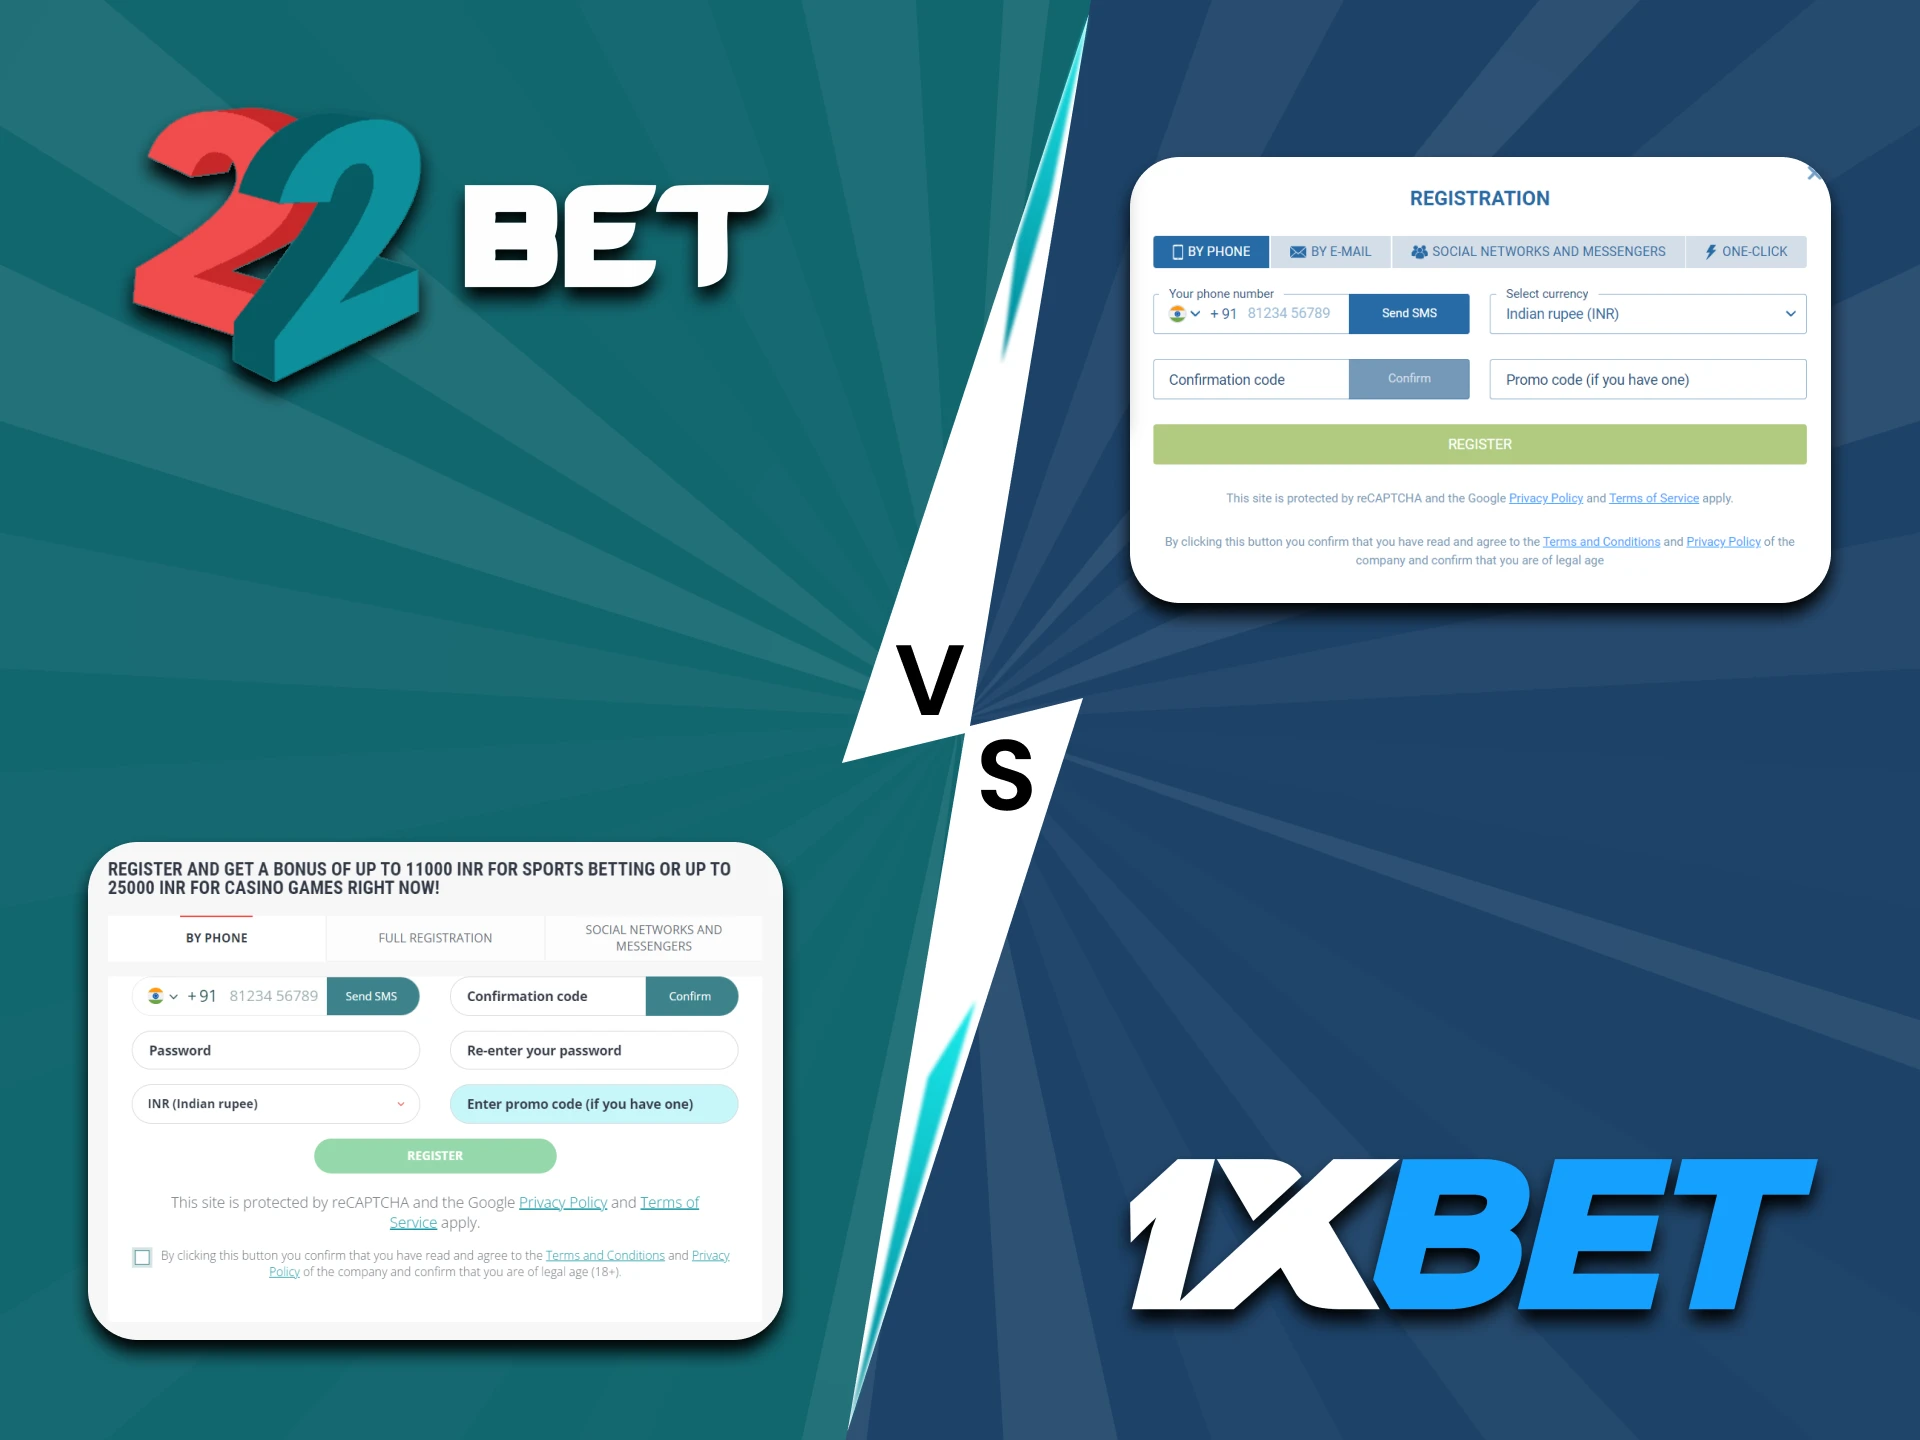 We will talk about the differences in the registration process between 22bet and 1xbet.